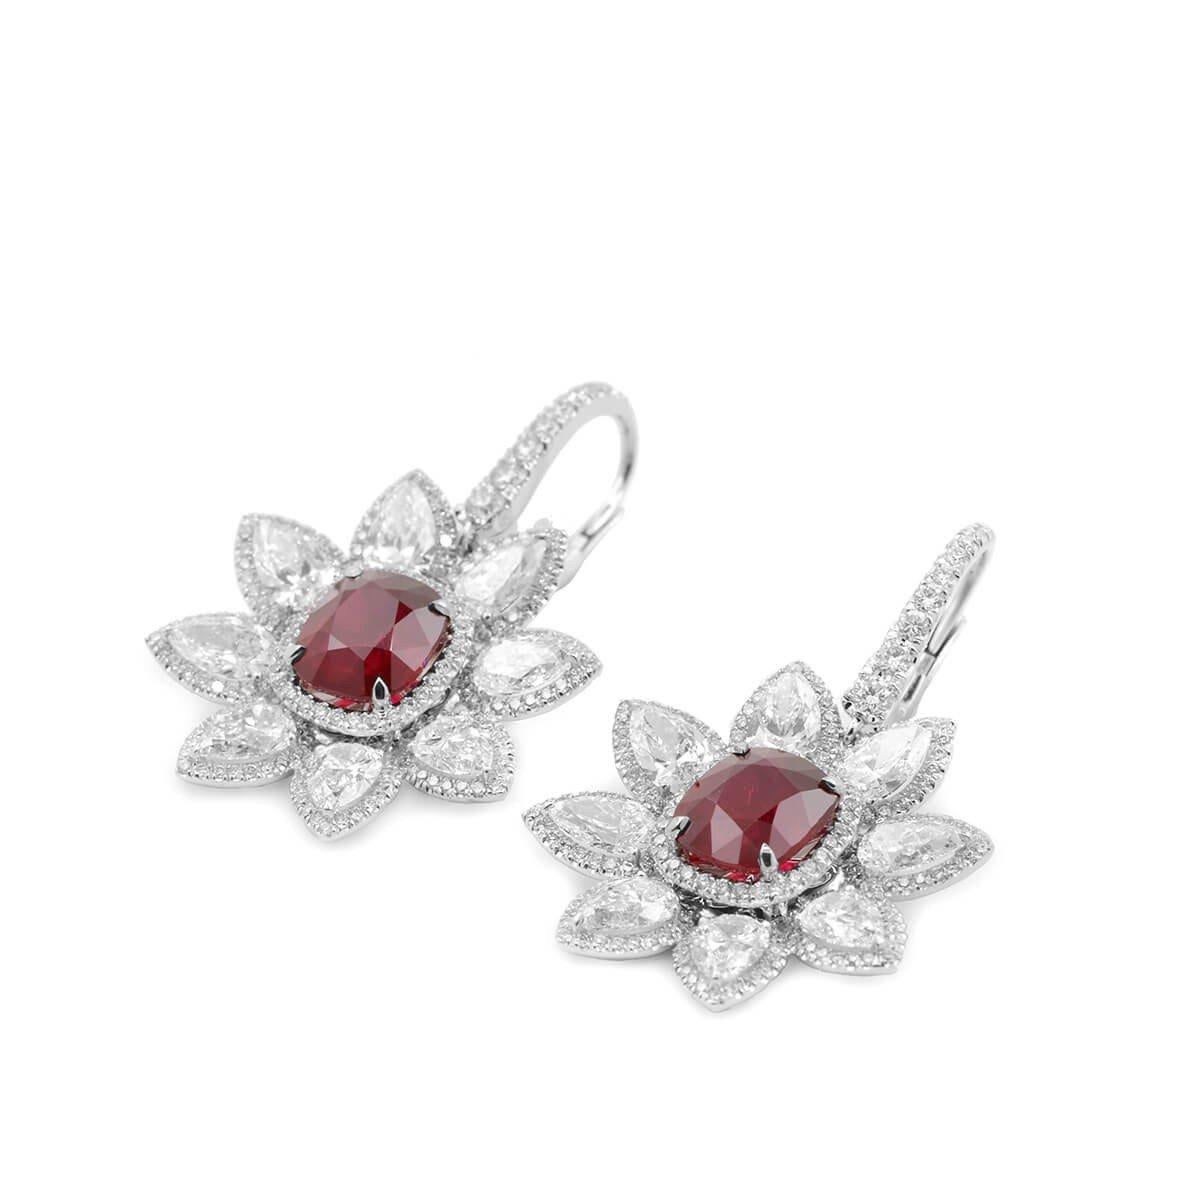 VIVID RED MOZAMBIQUE RUBY DIAMOND EARRINGS - 14.96 CT


Set in 18kt White Gold


Total ruby weight: 6.46 ct
[ 2 stones ]
Color: Vivid red

Total pear cut diamond weight: 6.60 ct
[ 16 diamonds ]
Color: E
Clarity: VS

Total brilliant cut diamond